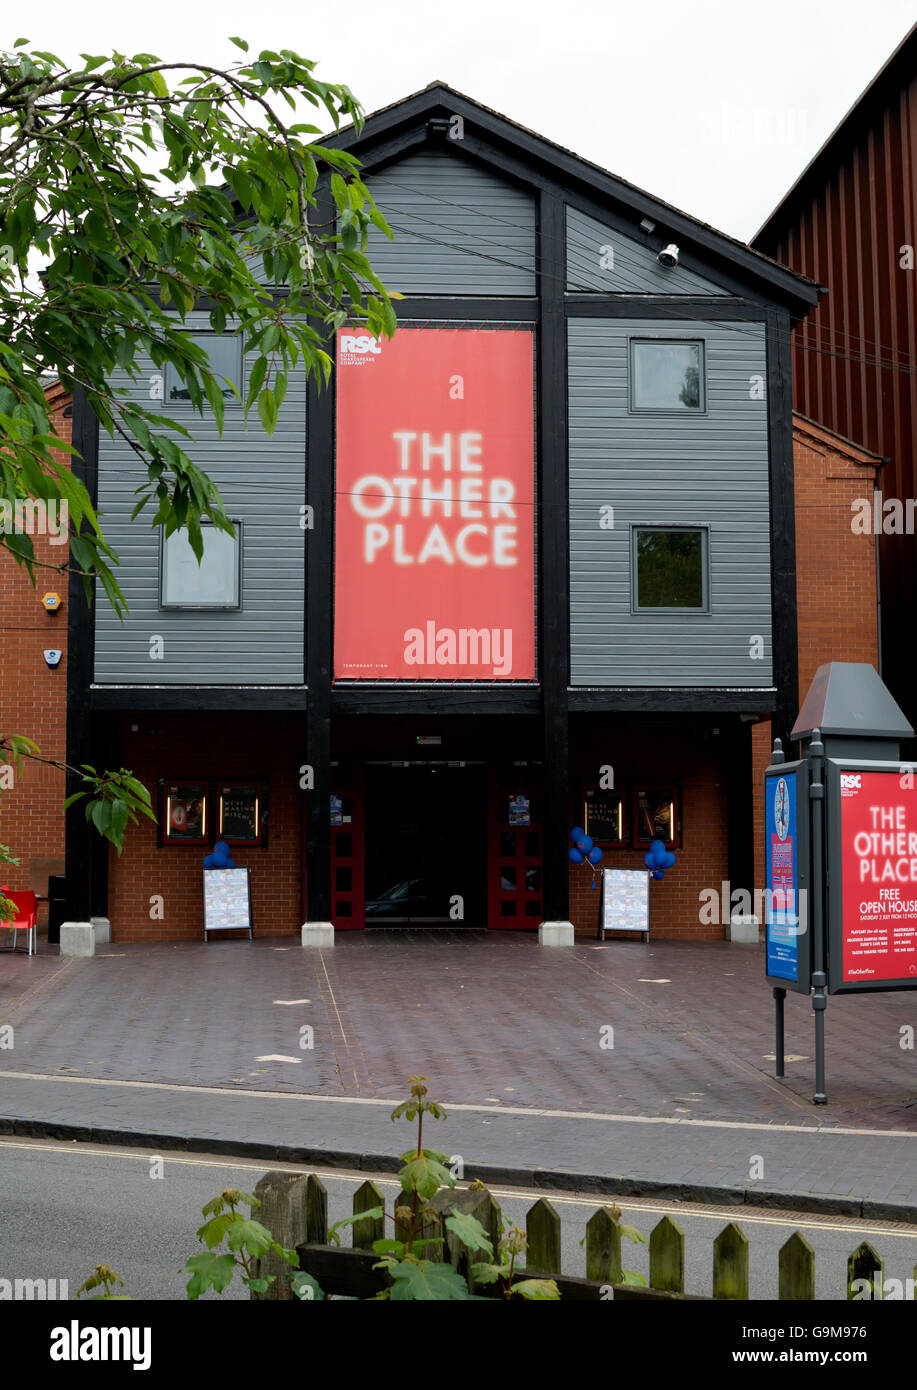 The Other Place theatre, Stratford-upon-Avon, UK Stock Photo